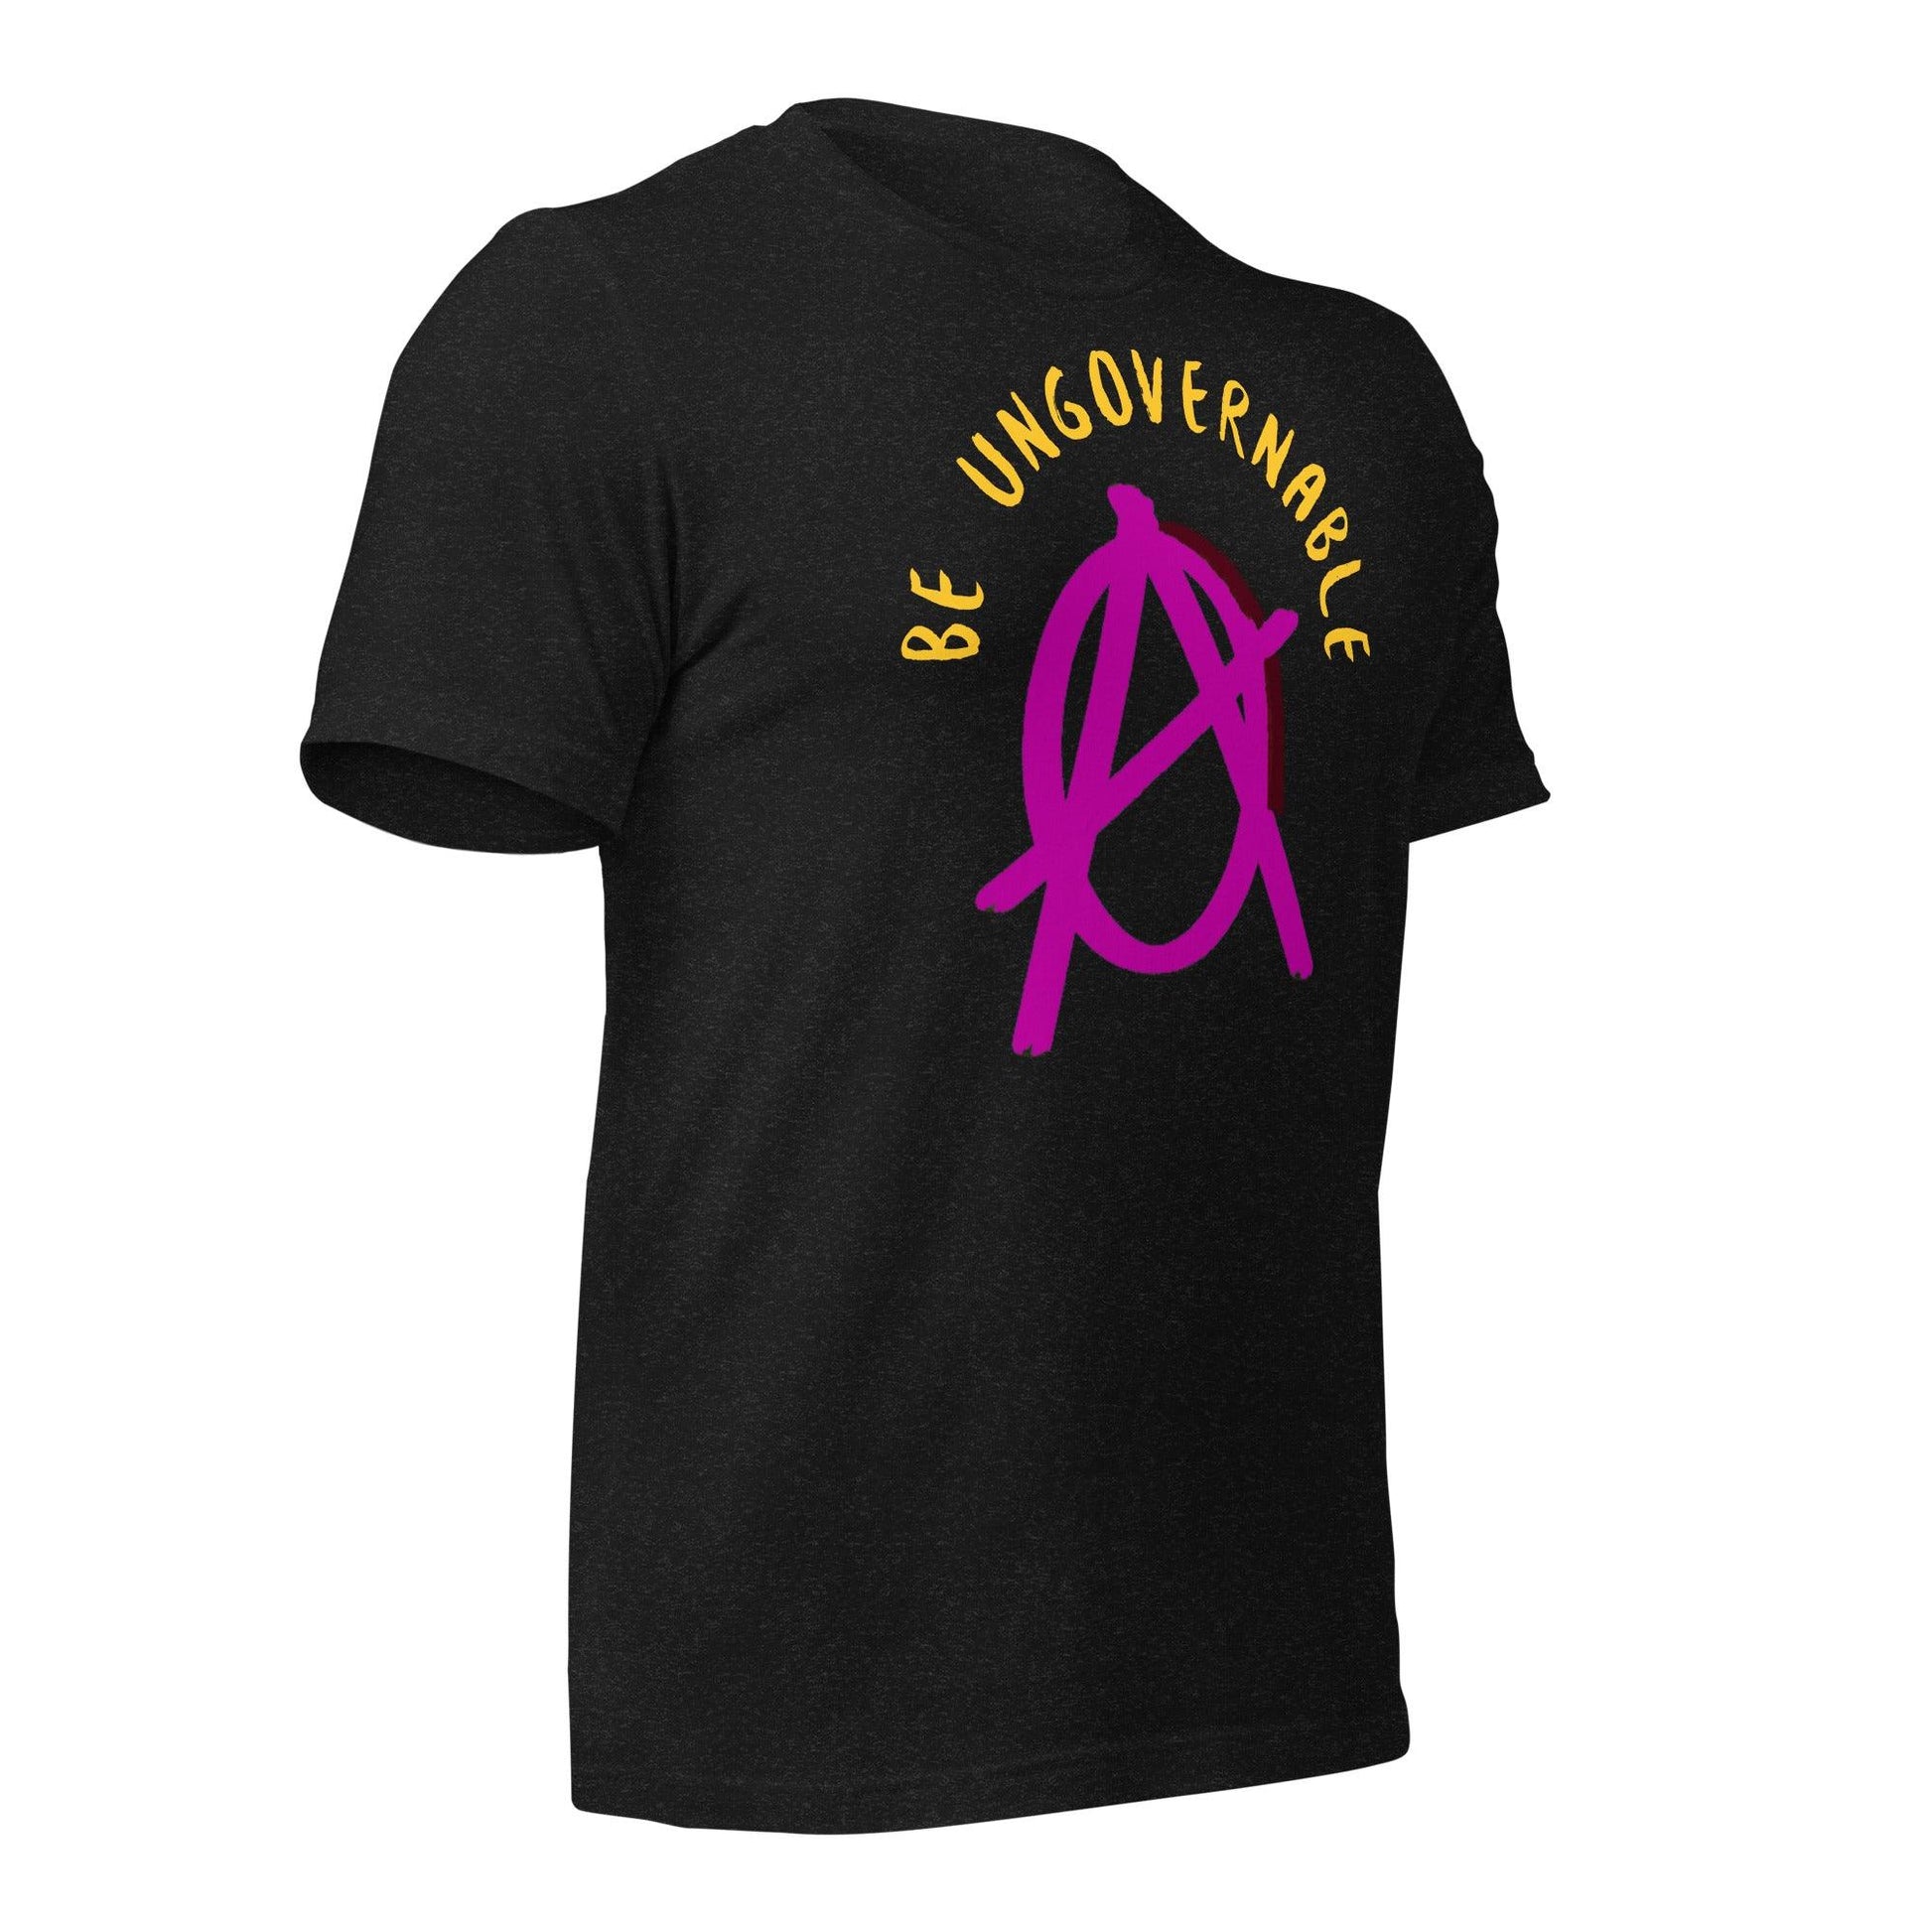 Anarchy Wear "Be Ungovernable" Pink Unisex t-shirt - AnarchyWear